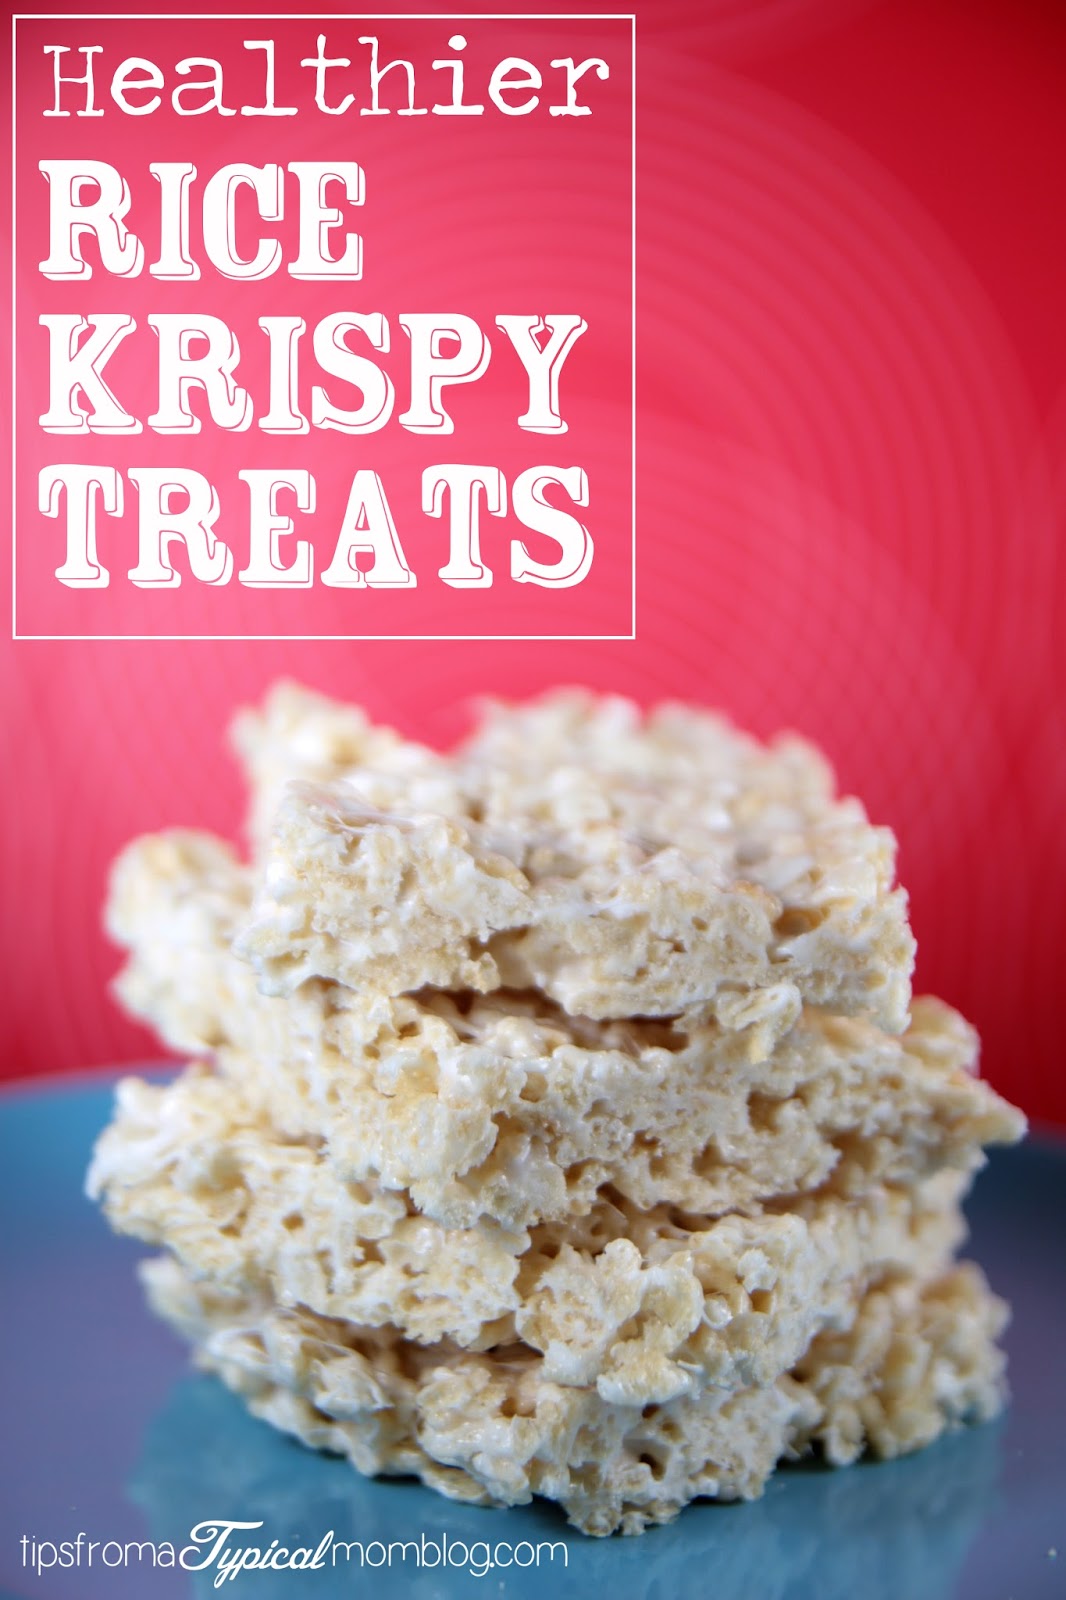 Healthier Rice Krispies Treats by Tips From a Typical Mom.